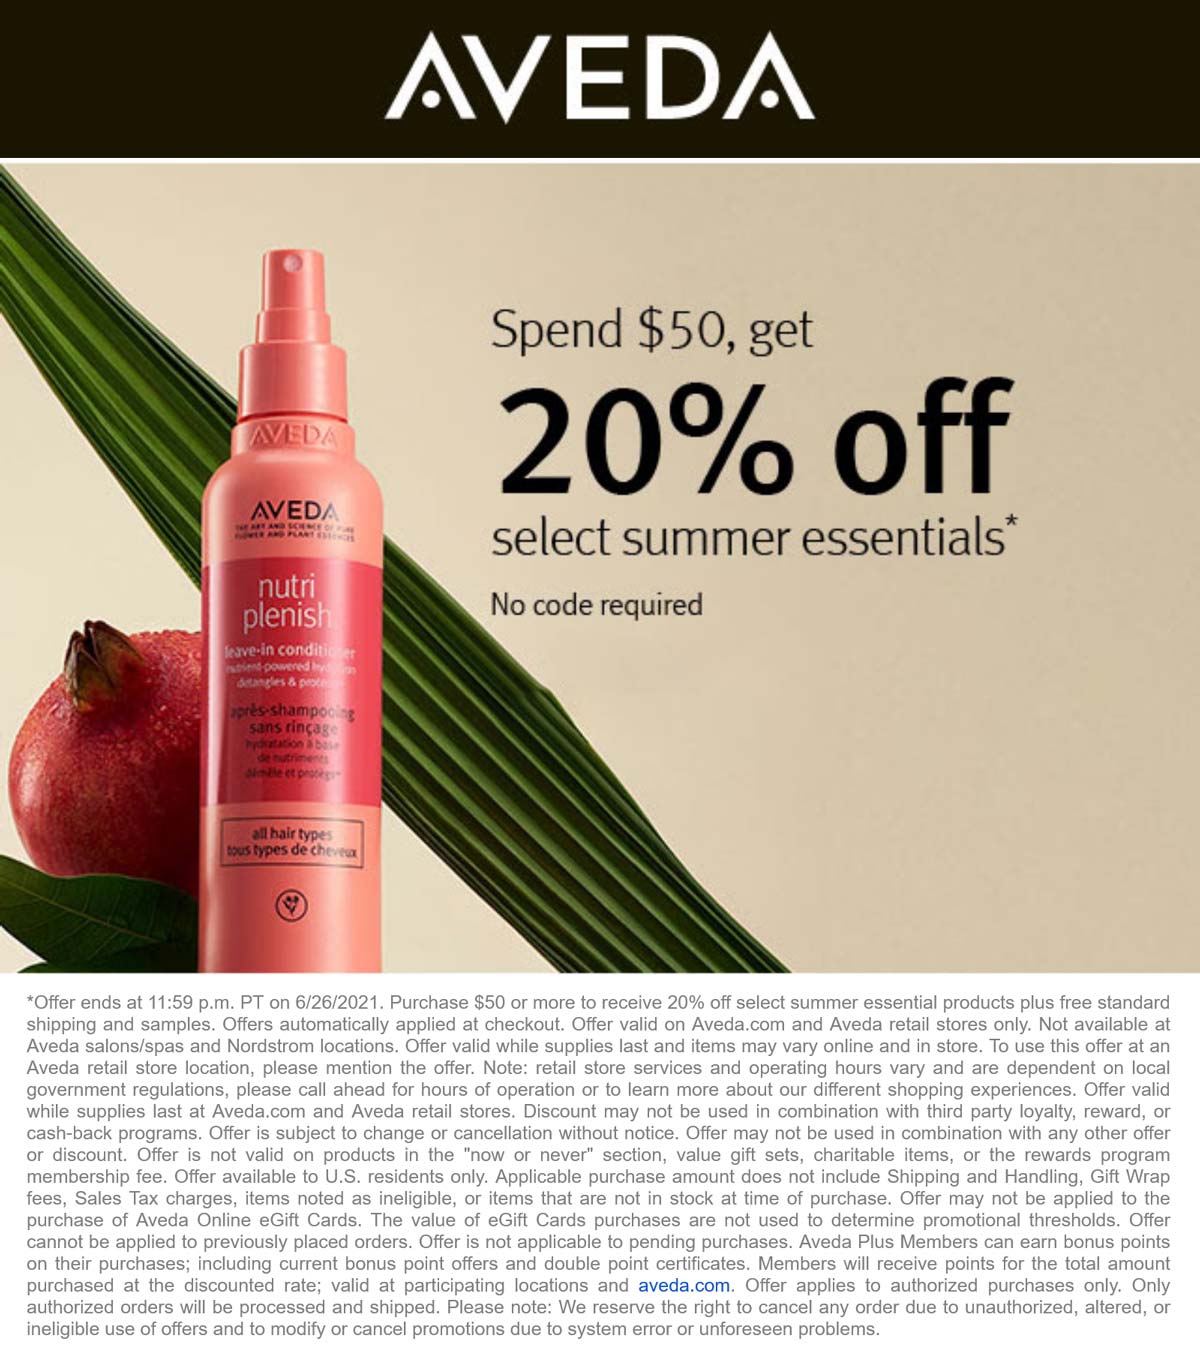 Aveda stores Coupon  20% off $50 on summer essentials at Aveda, ditto online #aveda 